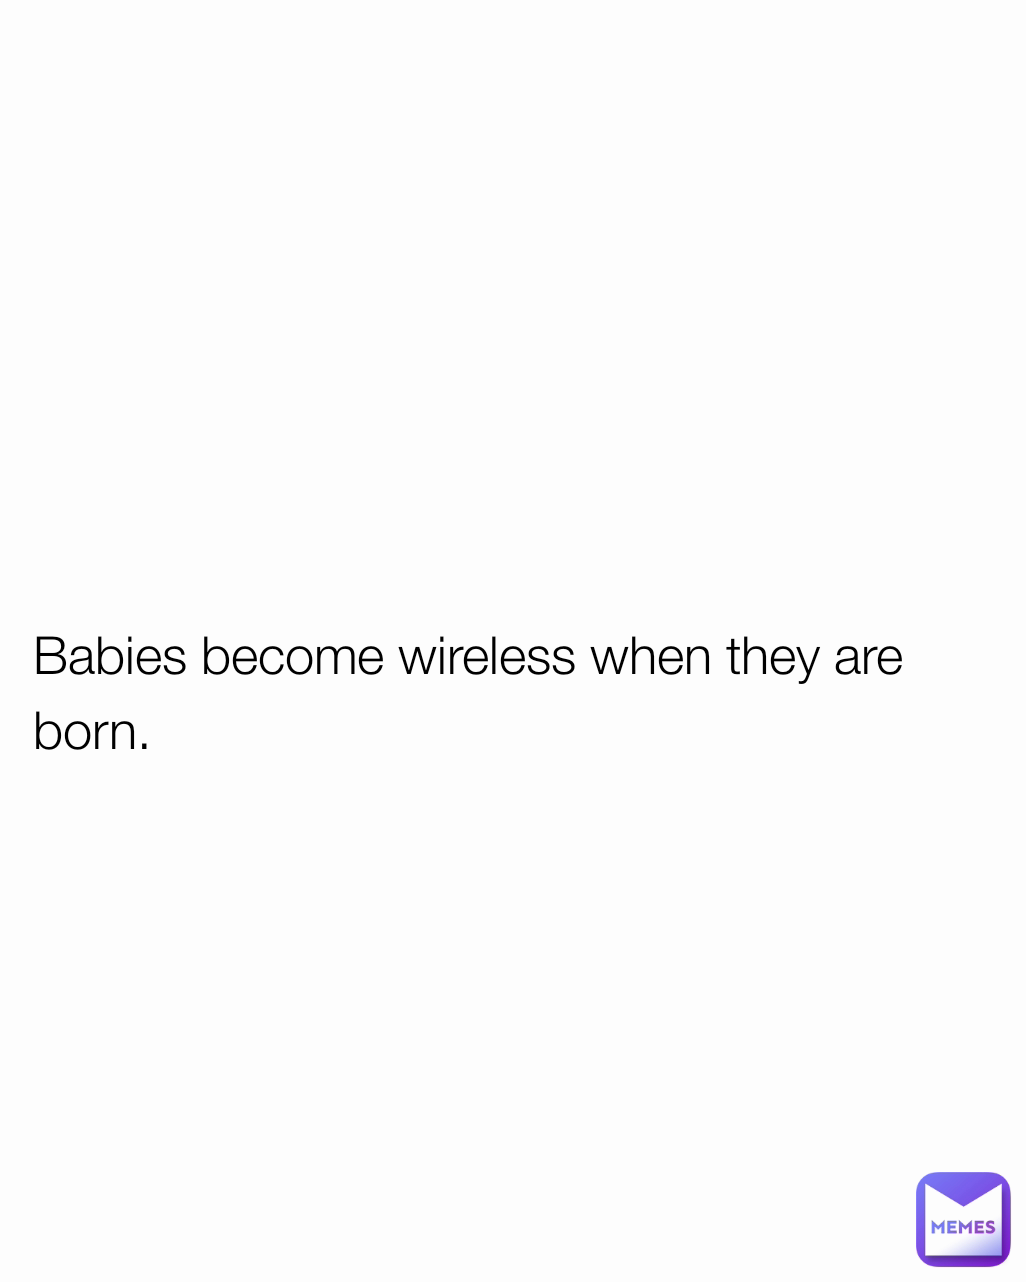 Babies become wireless when they are born.